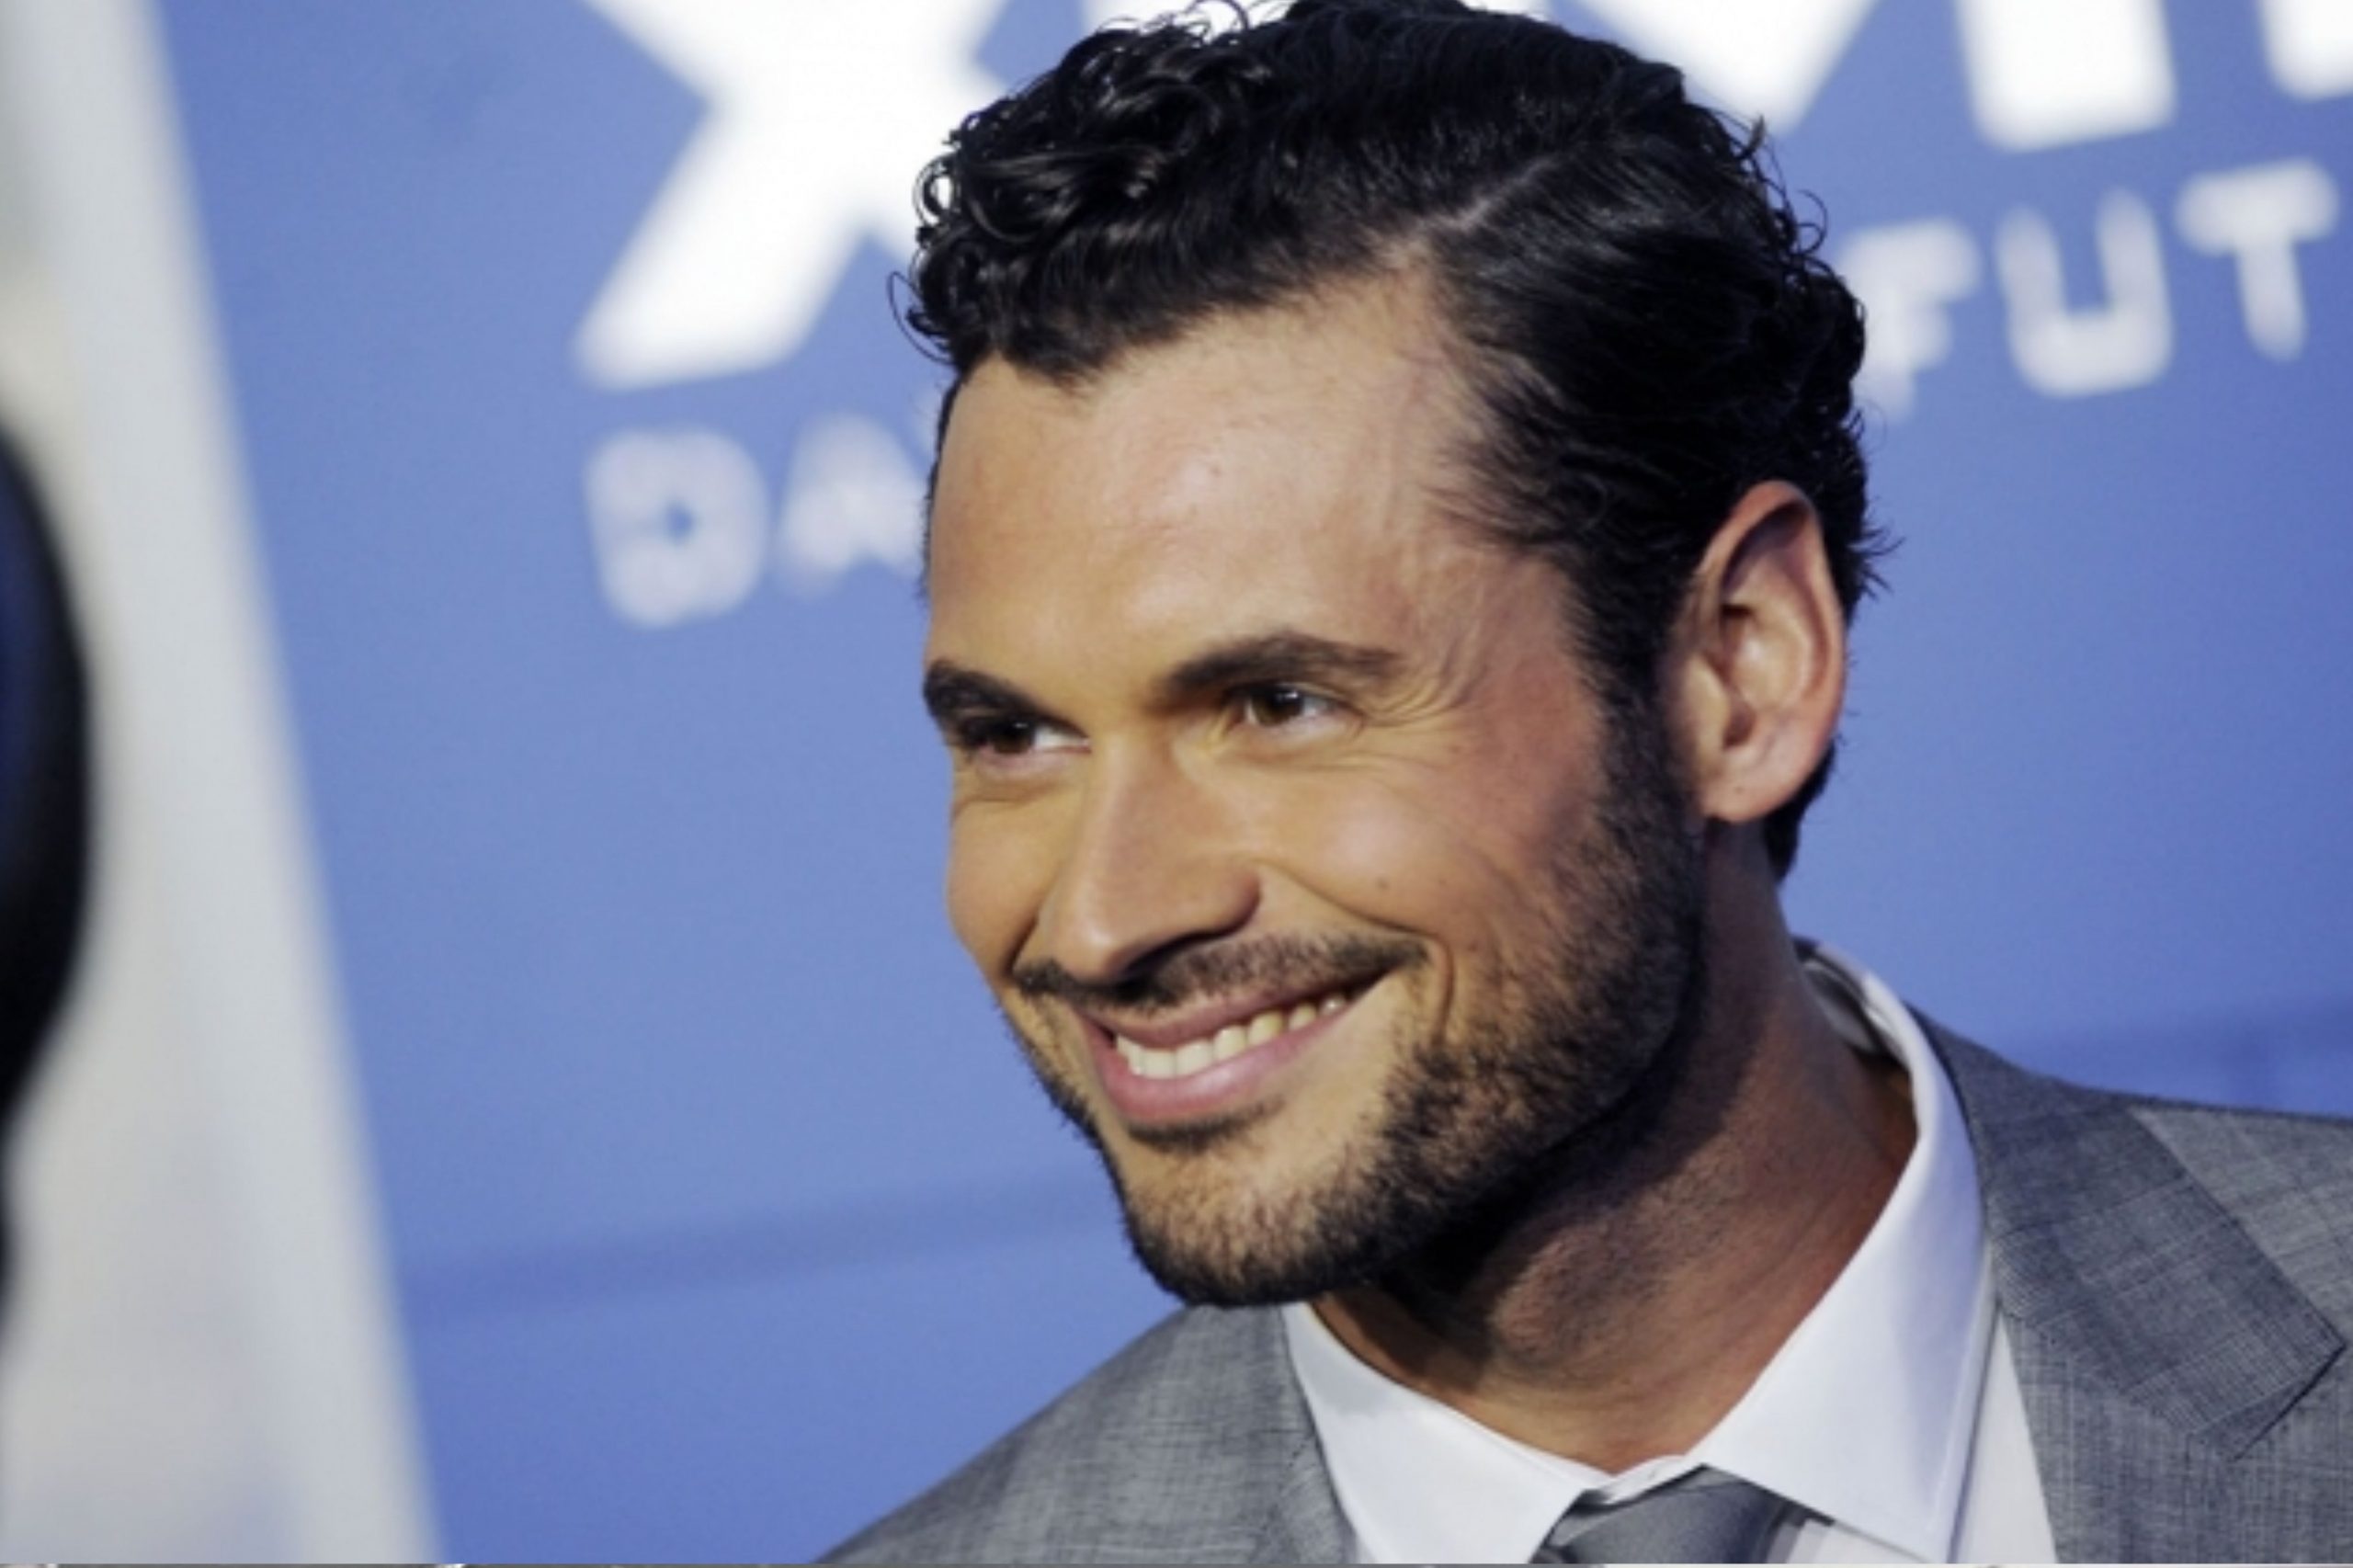 Actor Adan Canto, known for his role in X-Men, passed away at the age of 42, Magnate Daily